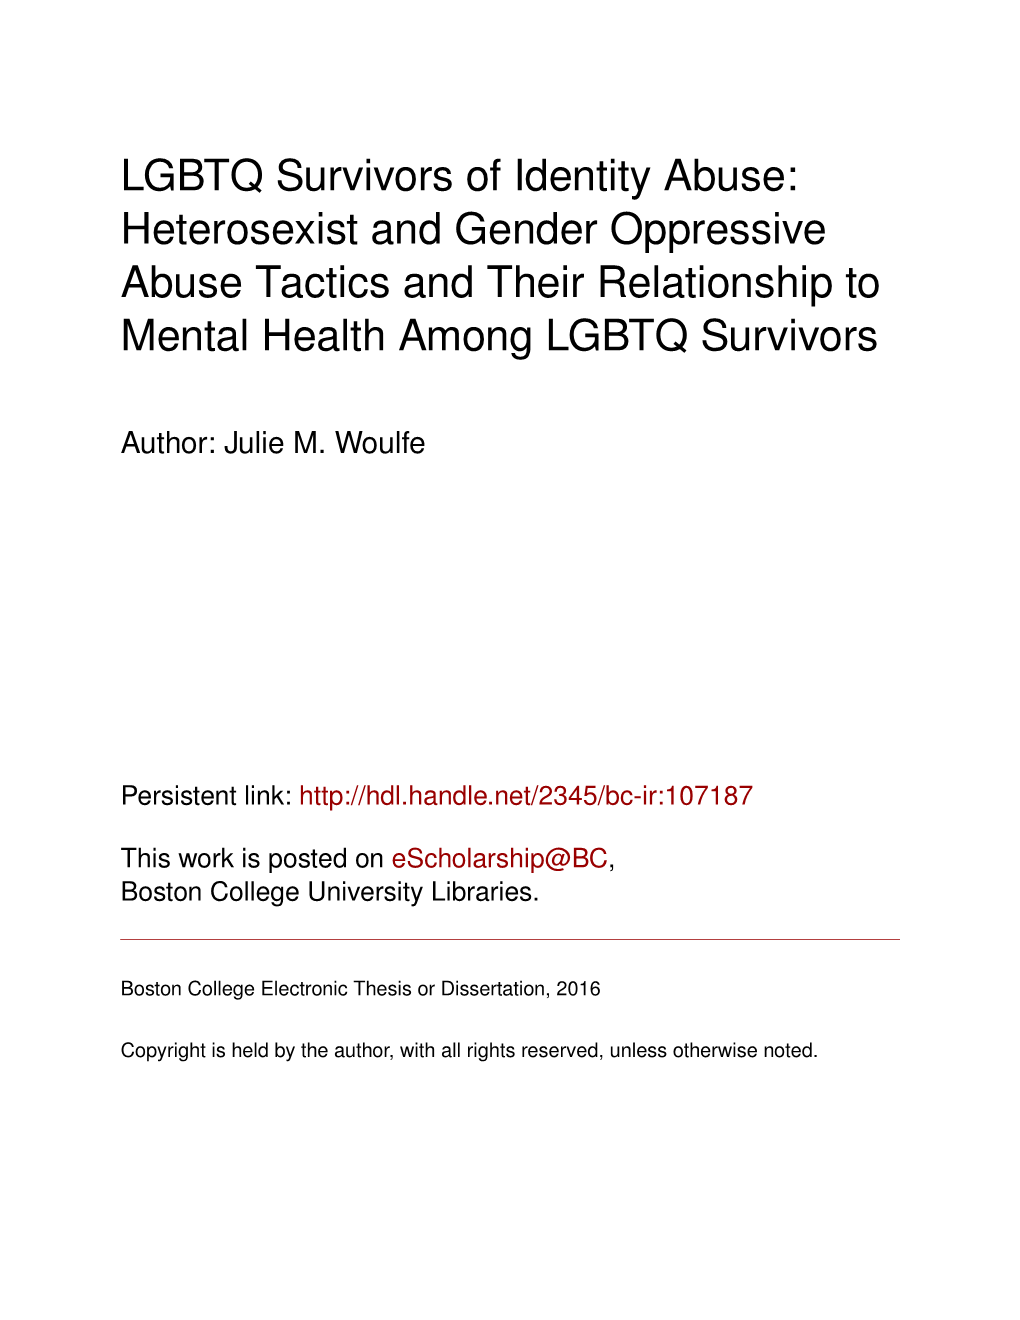 LGBTQ Survivors of Identity Abuse: Heterosexist and Gender Oppressive Abuse Tactics and Their Relationship to Mental Health Among LGBTQ Survivors